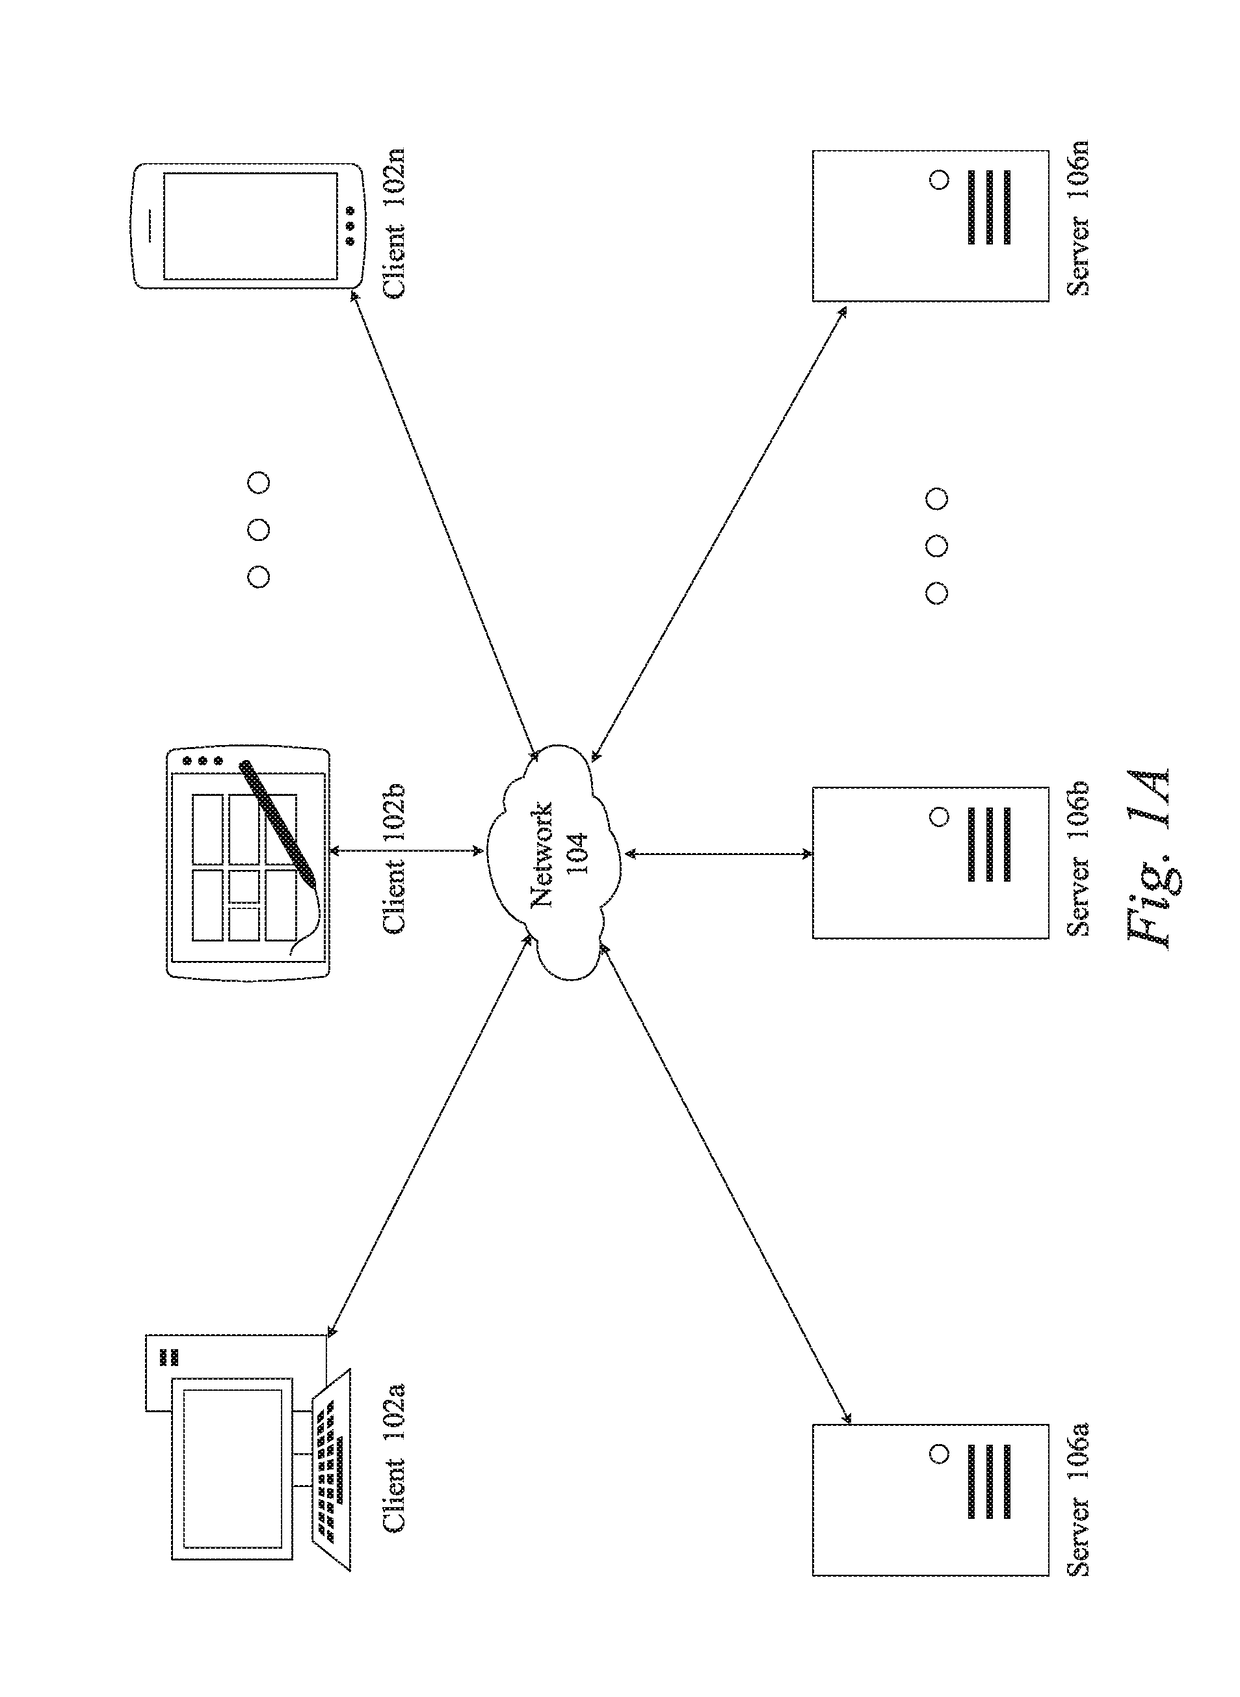 Systems and methods for an artificial intelligence driven smart template